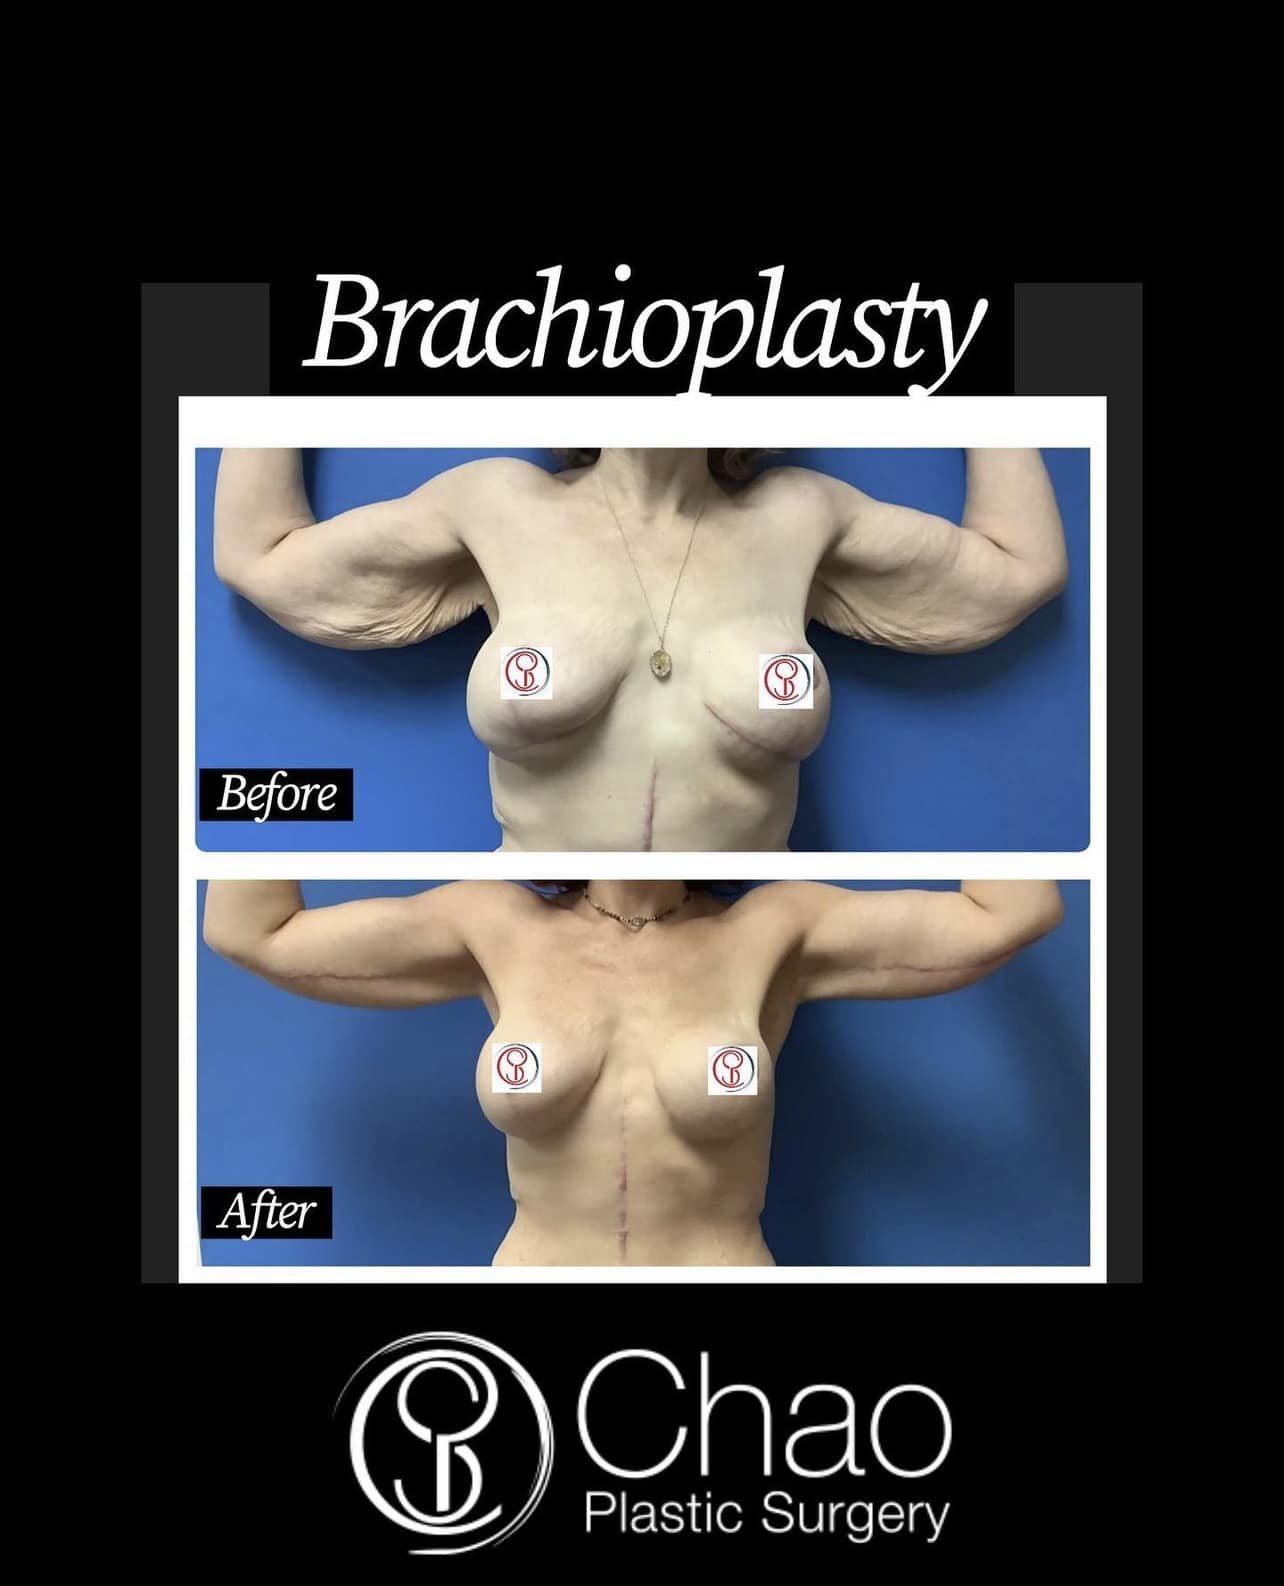 Brachioplasty 

😷 Treatment: Brachioplasty and Liposuction 
🎯 Purpose: To remove extra skin and fat to give a more toned and balanced appearance. Upper arm skin tends to droop with age, after significant weight loss, and for people with lymphedema
